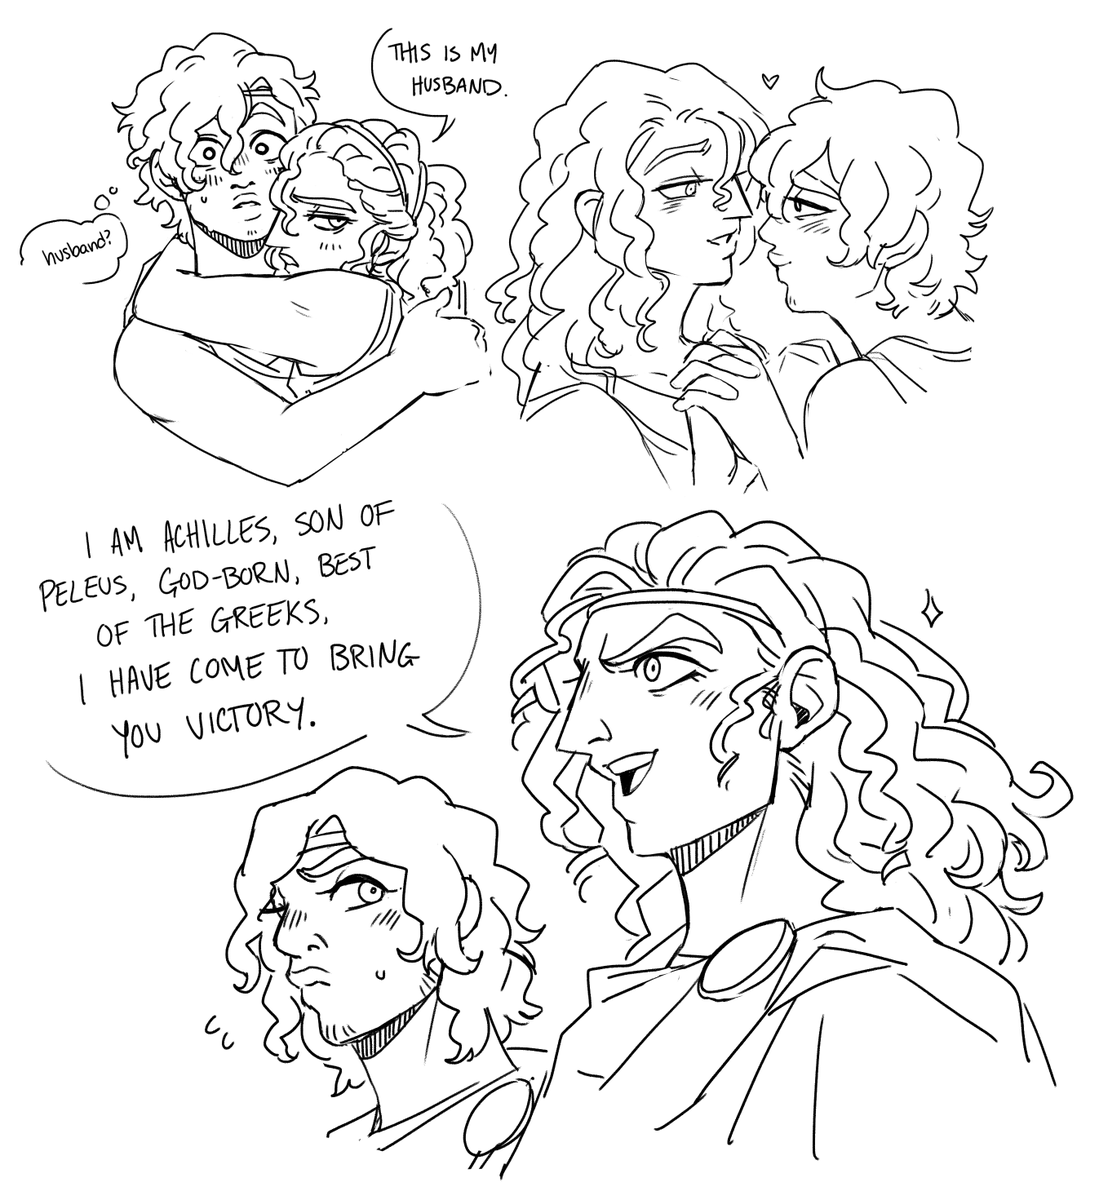 ive been reading song of achilles, its a great hades fanfic (I'M JOKING but i am constantly just imagining their designs in hades lol) 